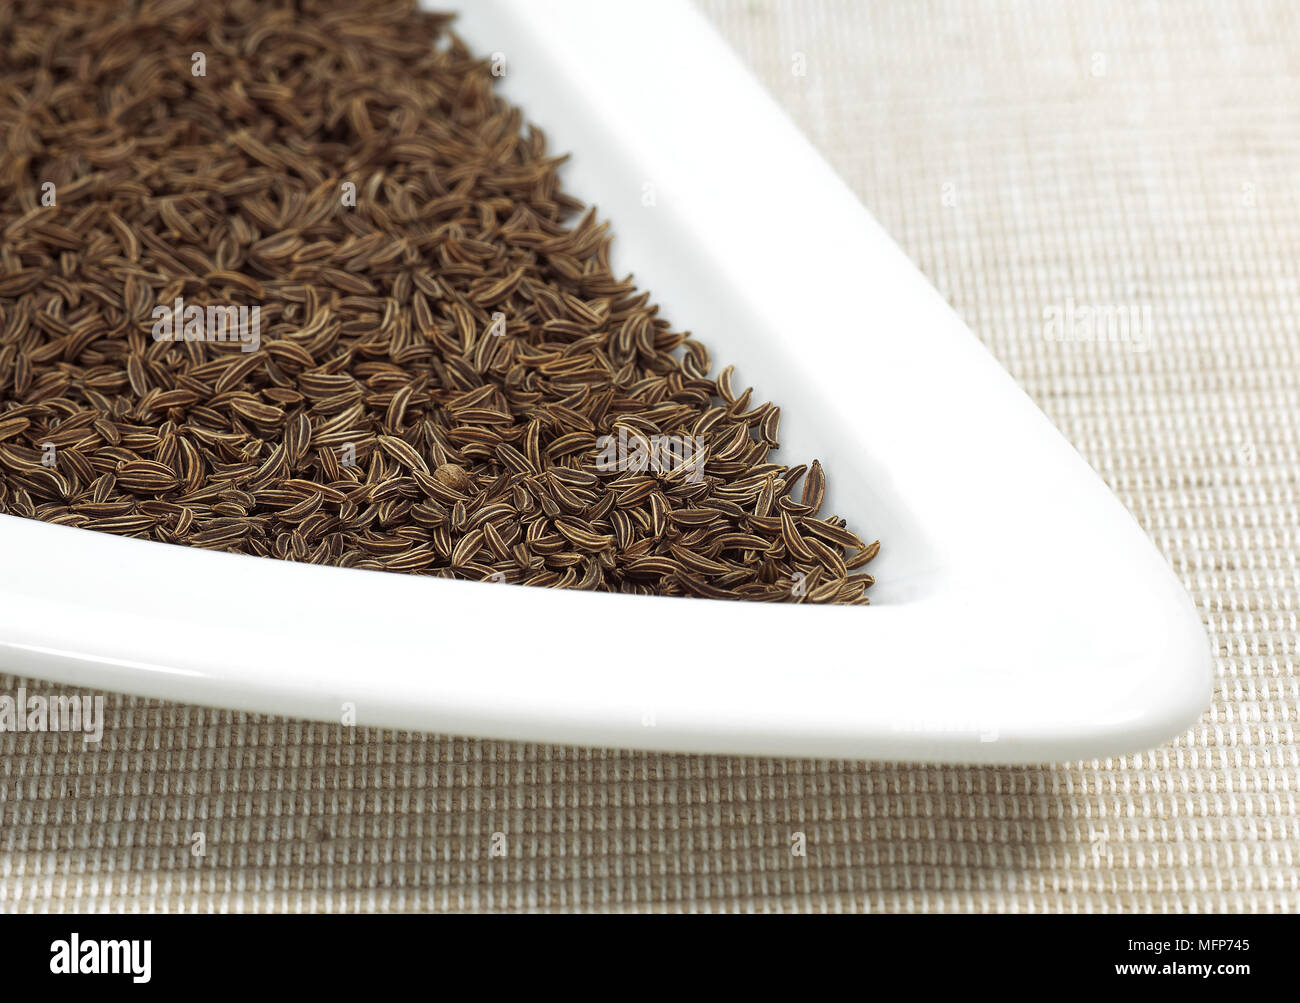 Caraway, carum carvi, Seeds in Plate Stock Photo